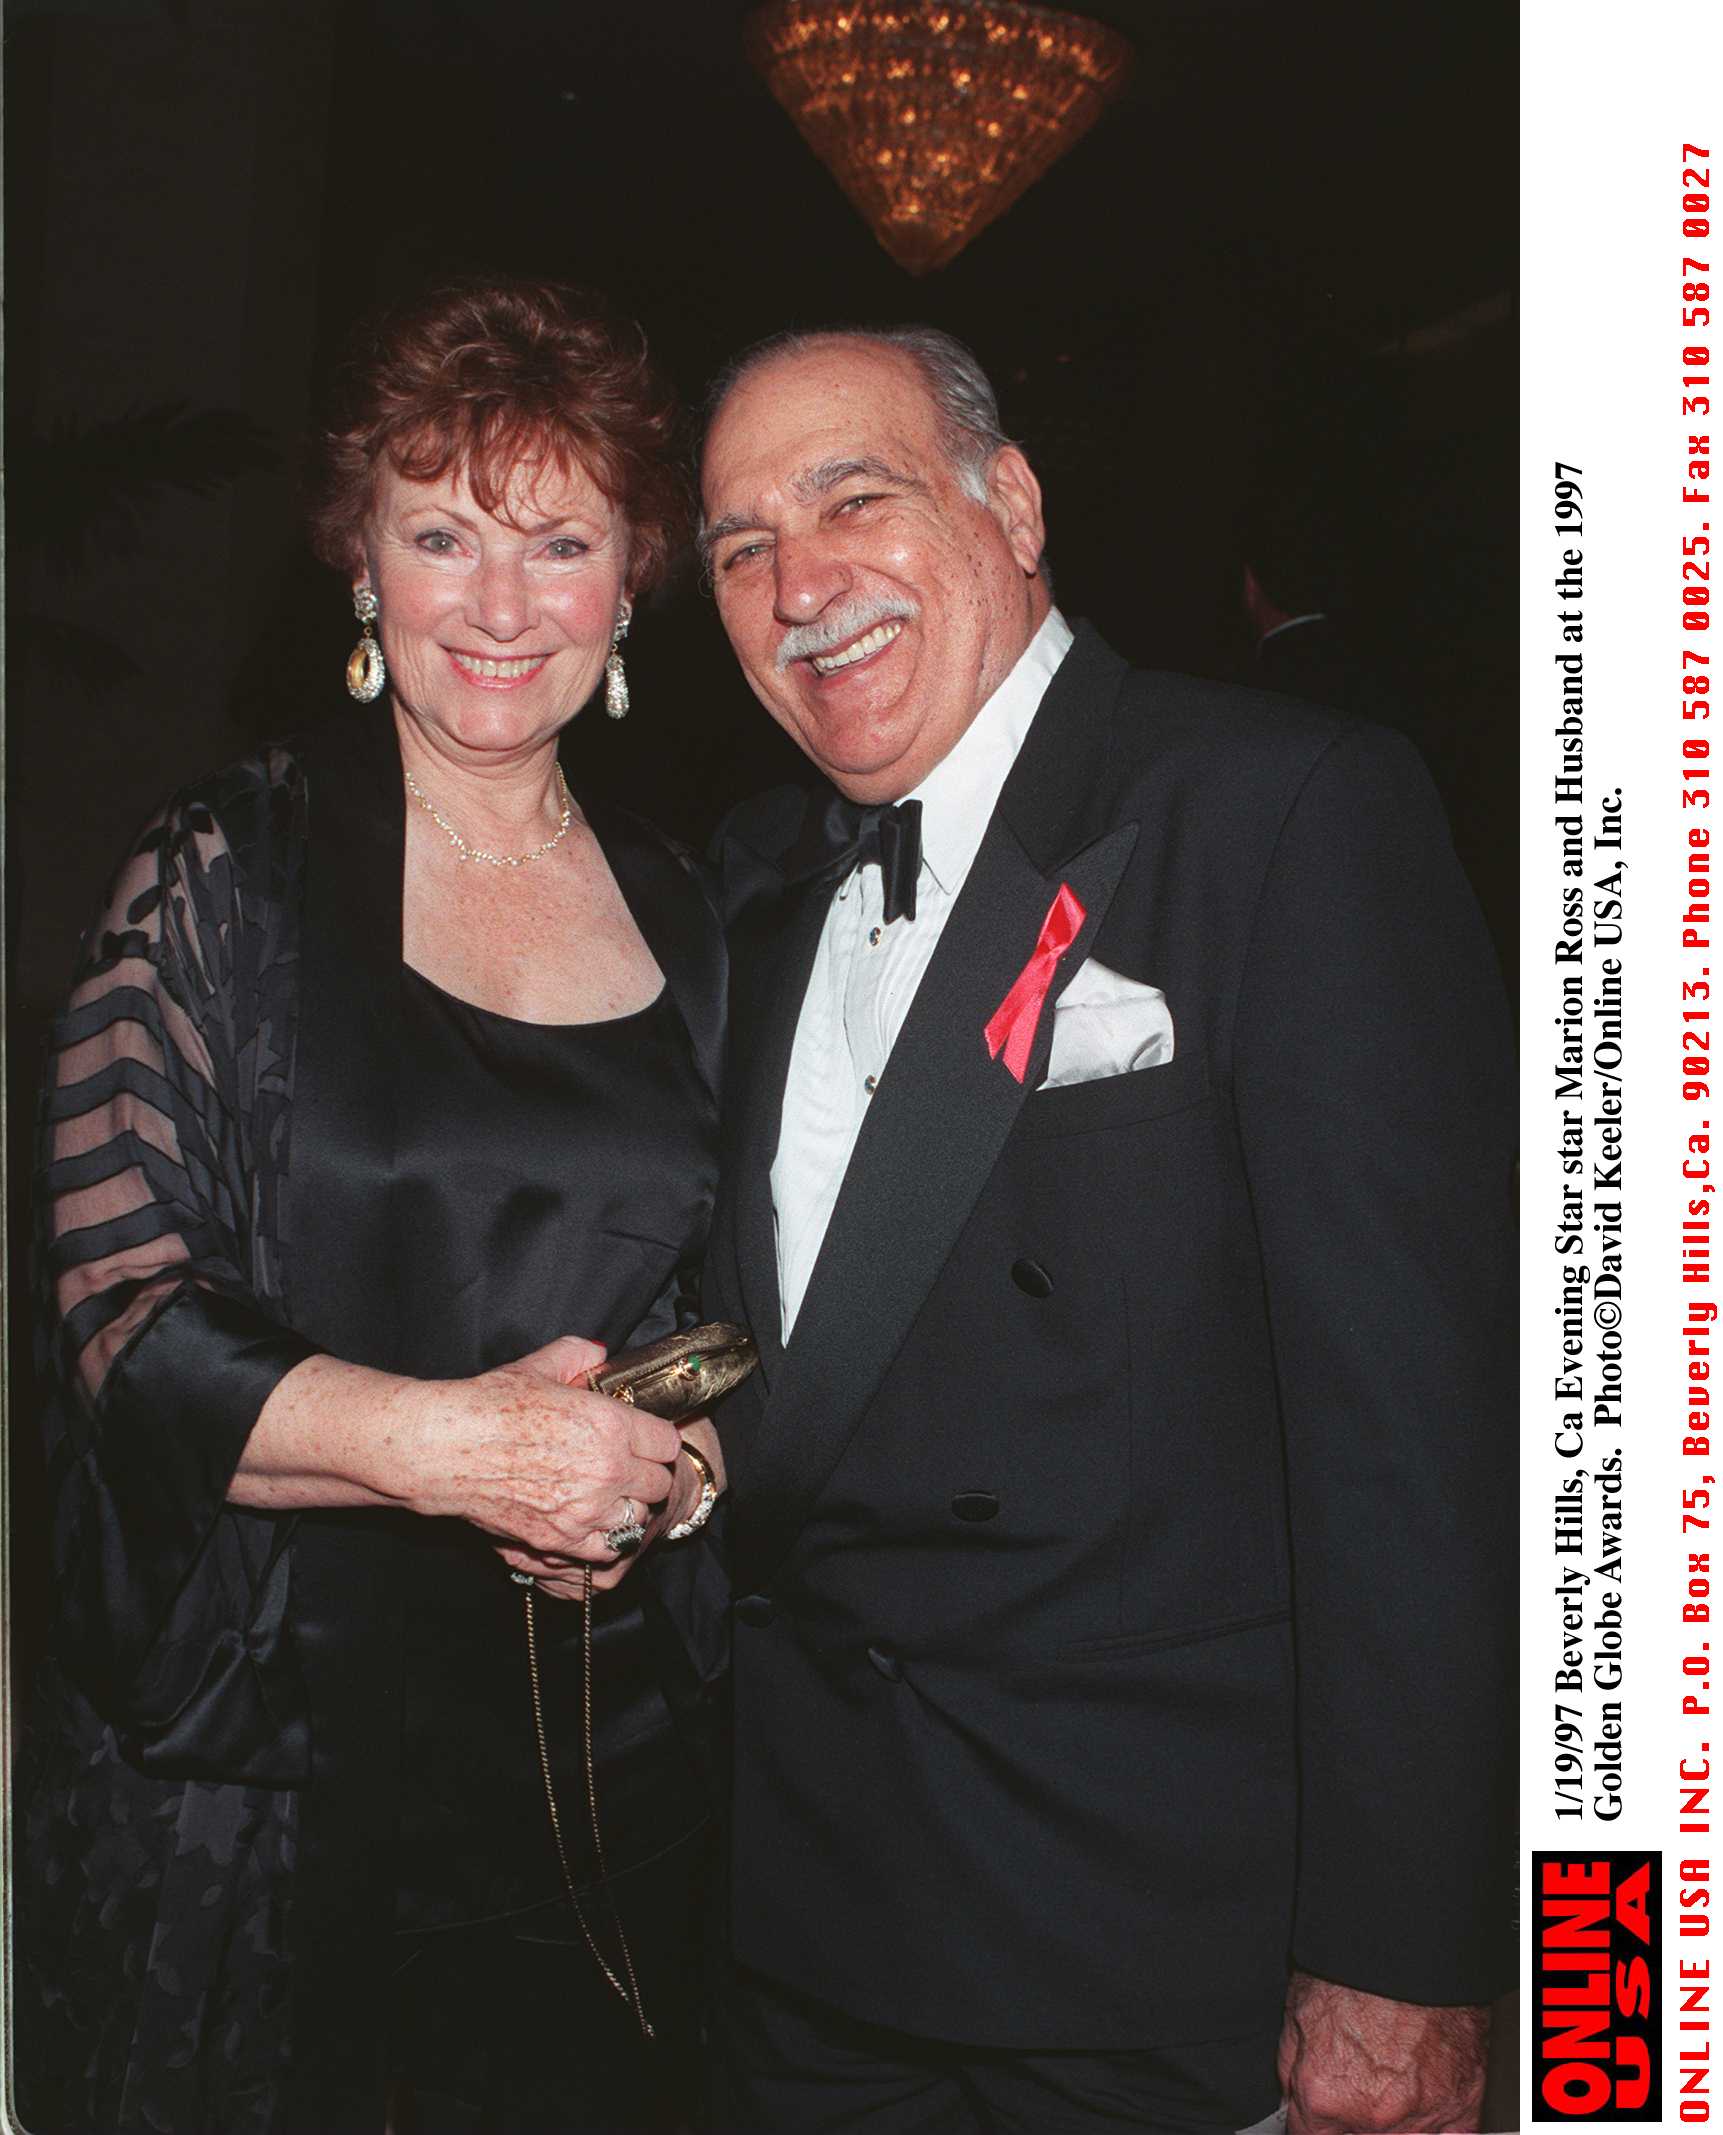 Marion Ross and Paul Michael in Beverly Hills, California, 1997 | Source: Getty Images